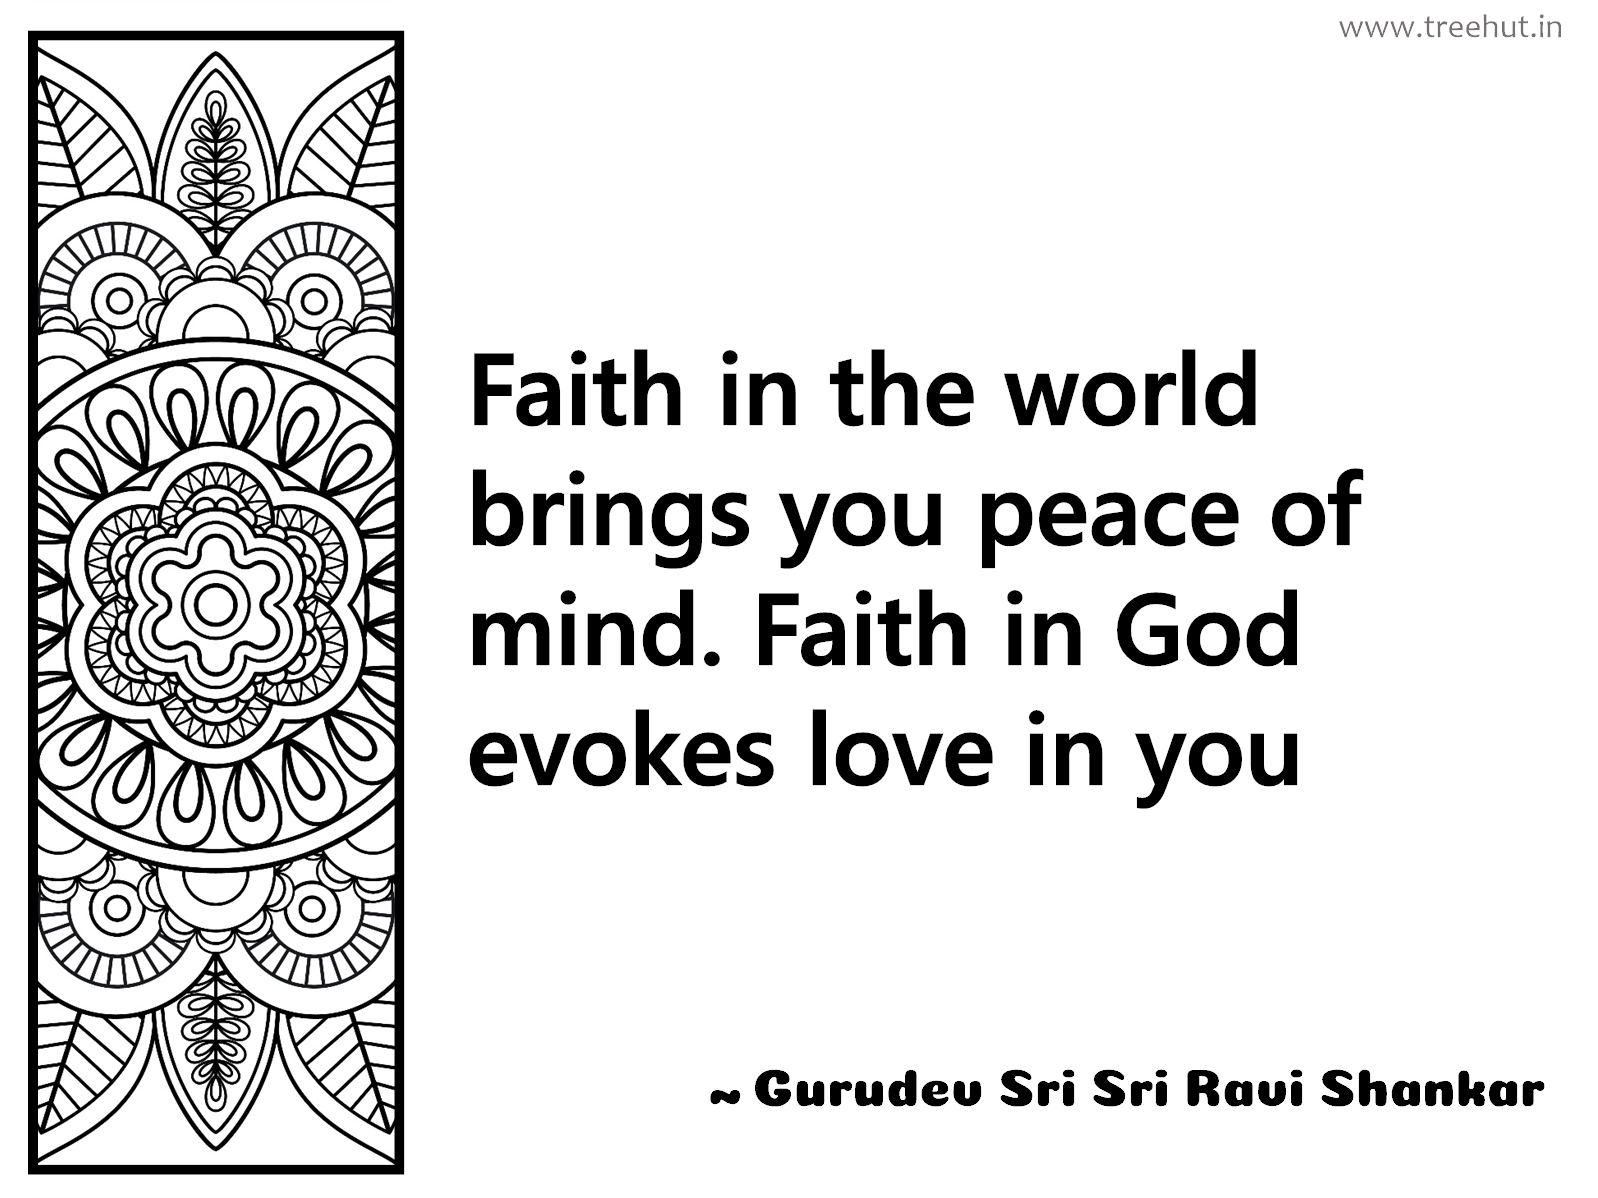 Faith in the world brings you peace of mind. Faith in God evokes love in you Inspirational Quote by Gurudev Sri Sri Ravi Shankar, coloring pages